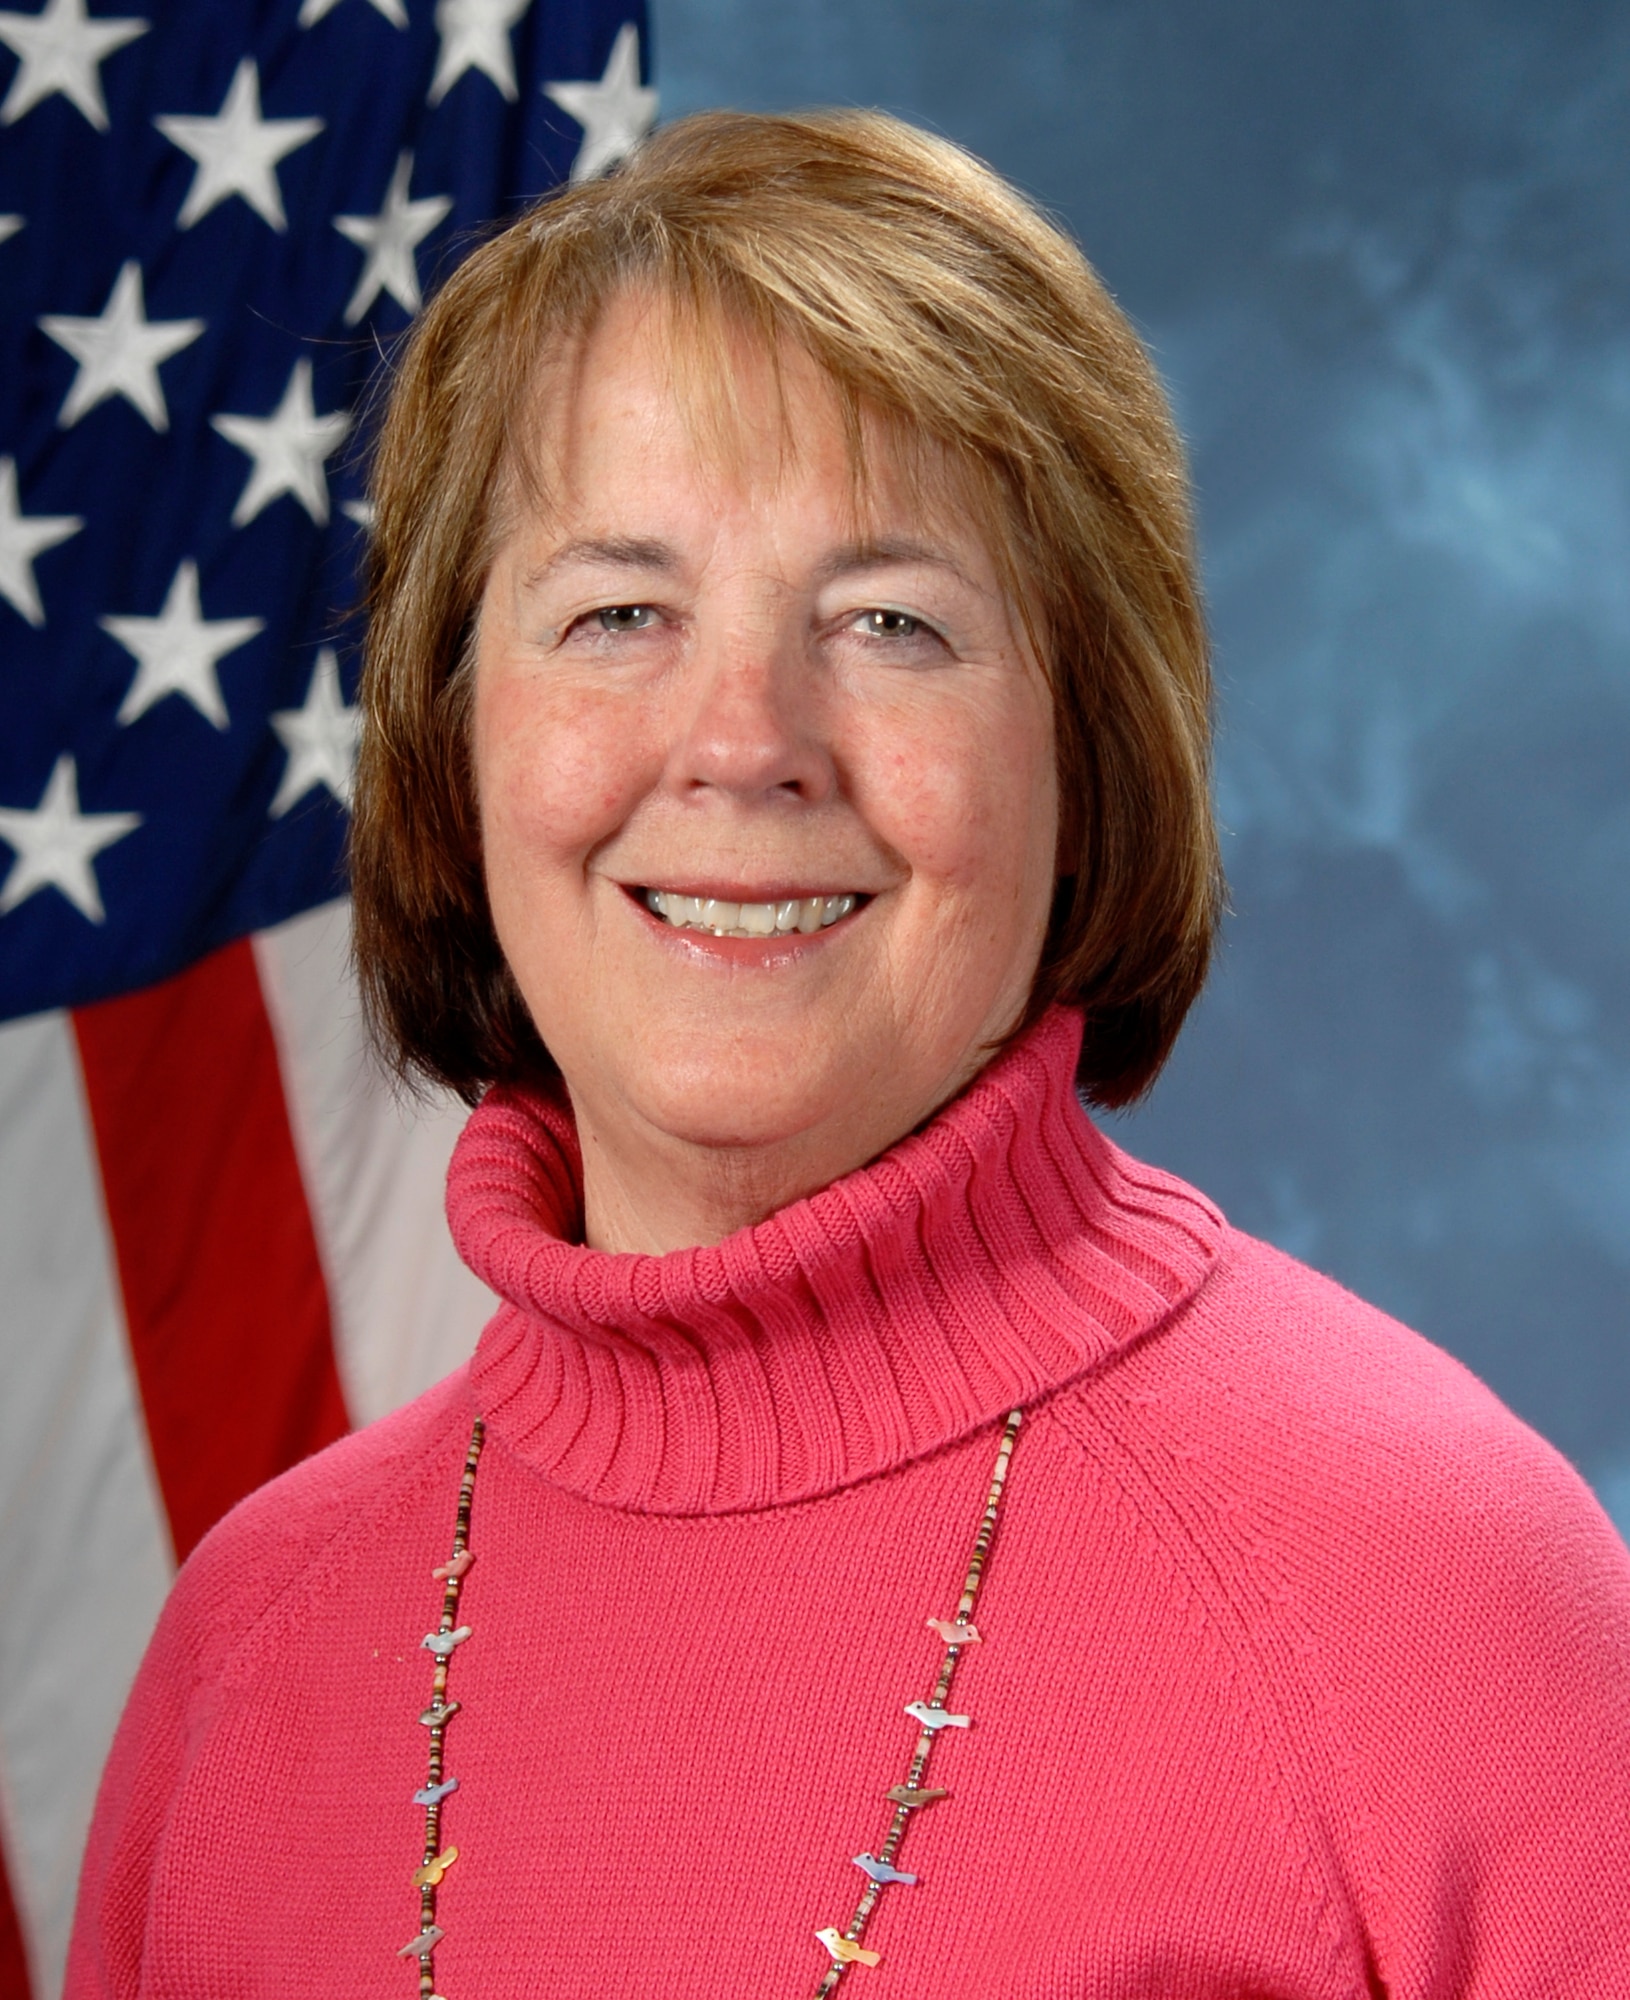 Dr. Frances Pilch was named the Colorado Professor of the Year Nov. 18, 2010, by the Council for Advancement and Support of Education. Dr. Pilch is a professor and deputy department head for the Air Force Academy's Department of Political Science. (U.S. Air Force photo)